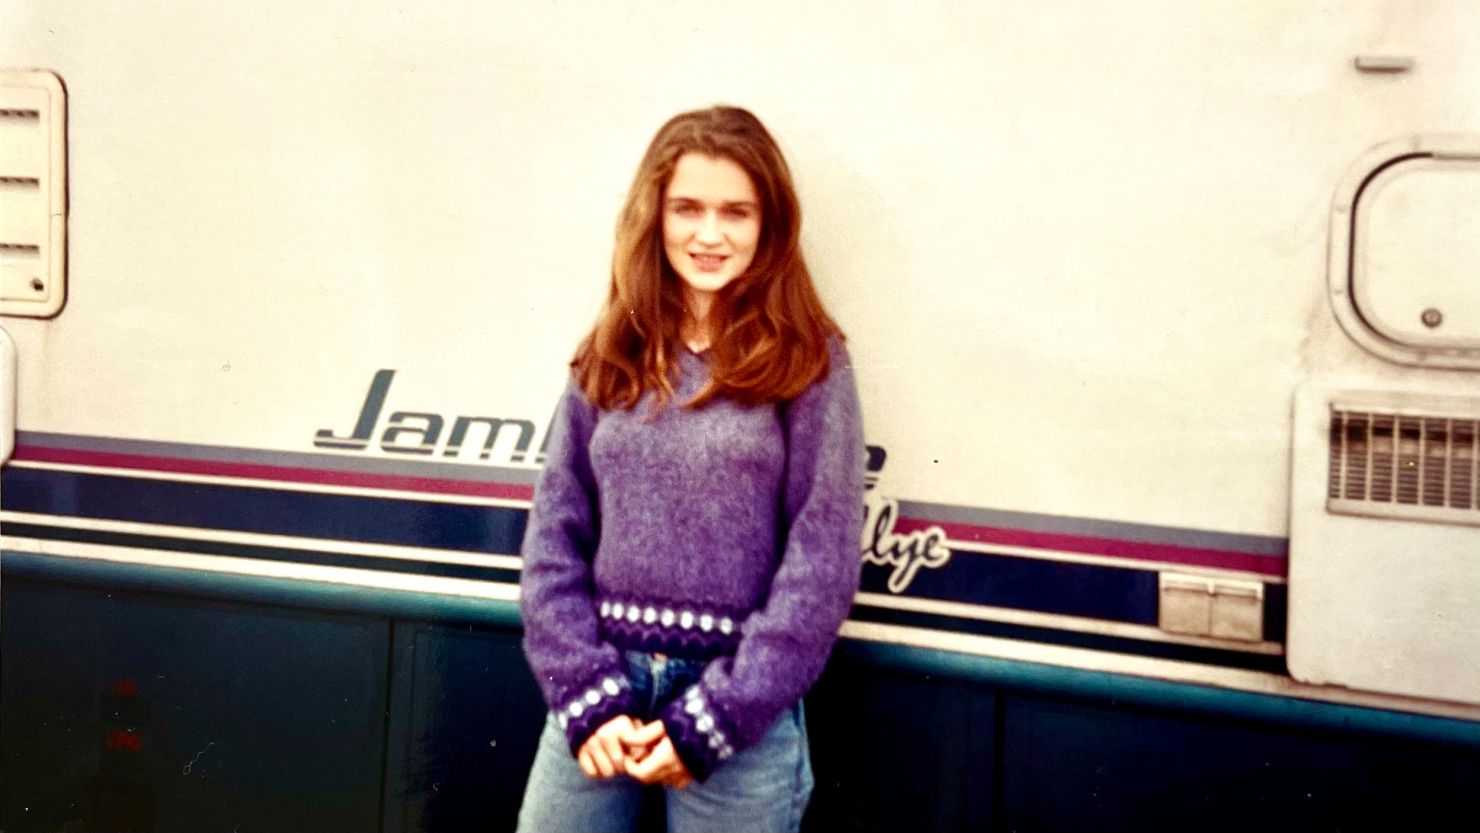 Carrie Sheffield, approximately age 16, during homeschool studies sophomore high school year, standing outside her family's Fleetwood Jamboree RV temporarily parked in a Columbia, Missouri RV park.